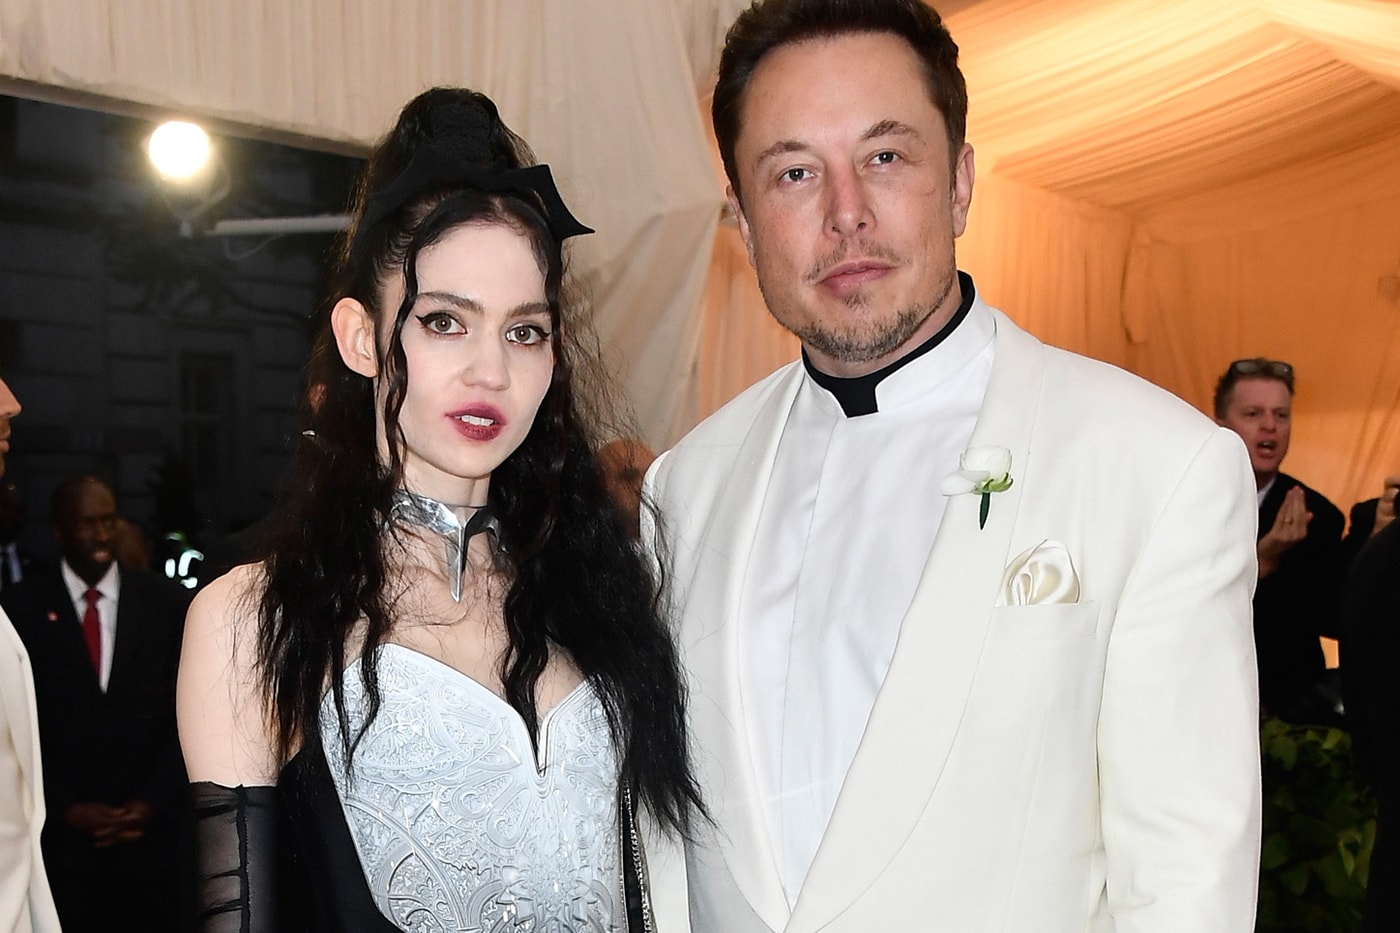 Grimes Second Child With Elon Musk Birth Name Reveal Info Exa Dark Sideræl Daughter Book 1 X Æ A-12